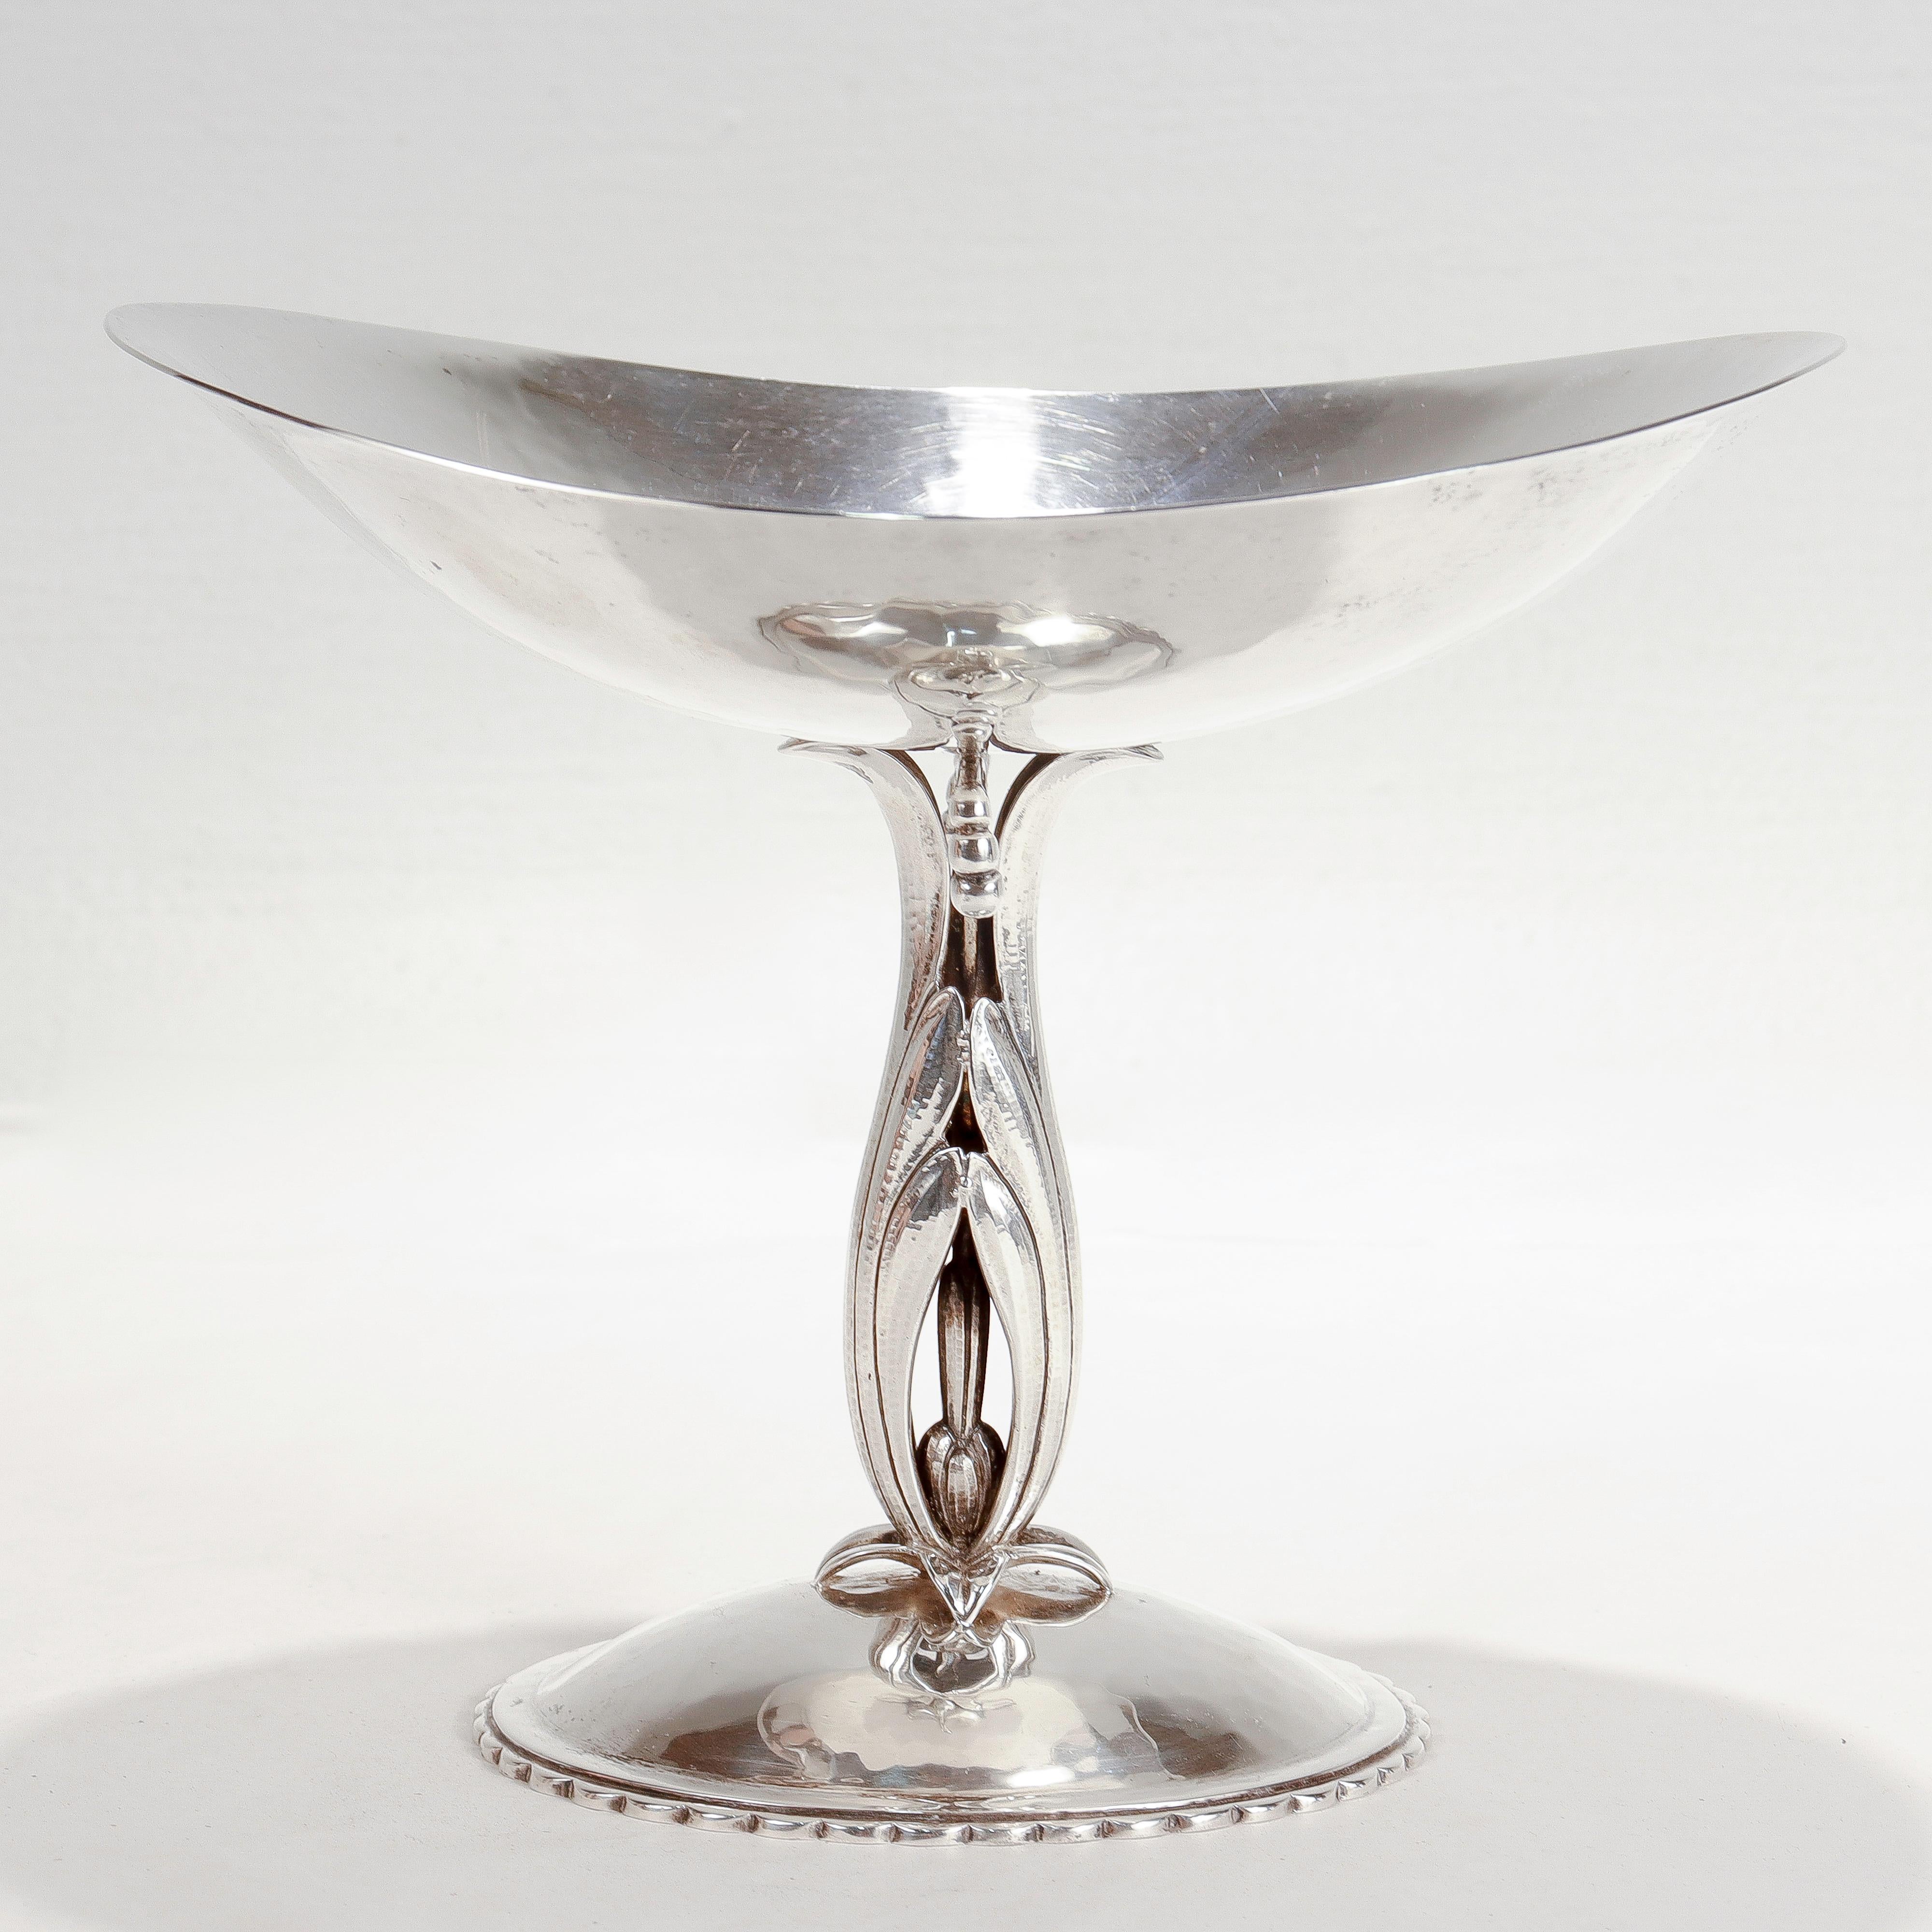 A fine American Arts & Crafts tazza or footed compote.

In sterling silver.

By Cellini Craft of Chicago.

With a stylized floral & foliate pedestal, an oval hand-hammered bowl, and a convex scalloped base.

Simply a wonderful piece by Cellini